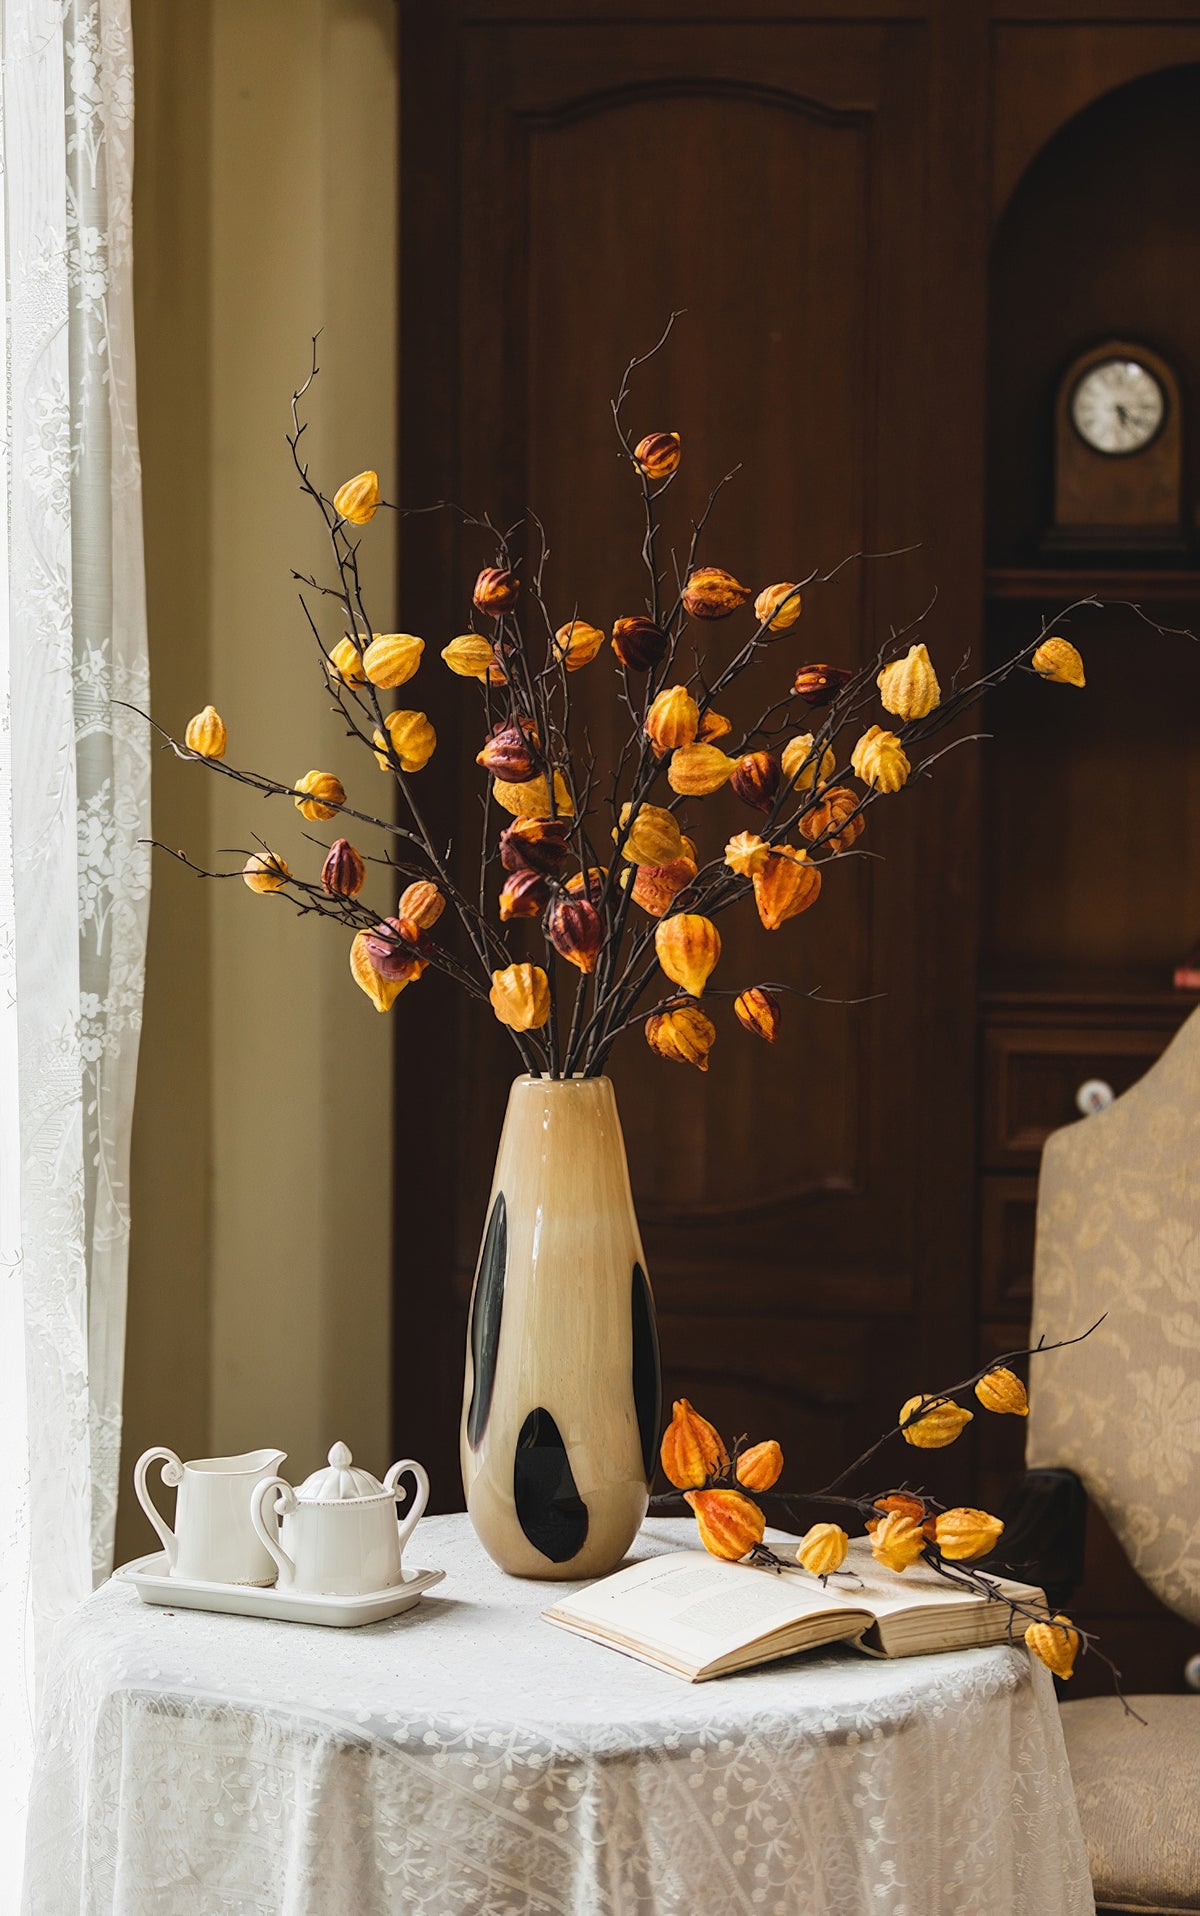 A vintage ceramic vase with black spots, placed on a wooden table, filled with branches bearing orange foliage, beside a classic teapot set.